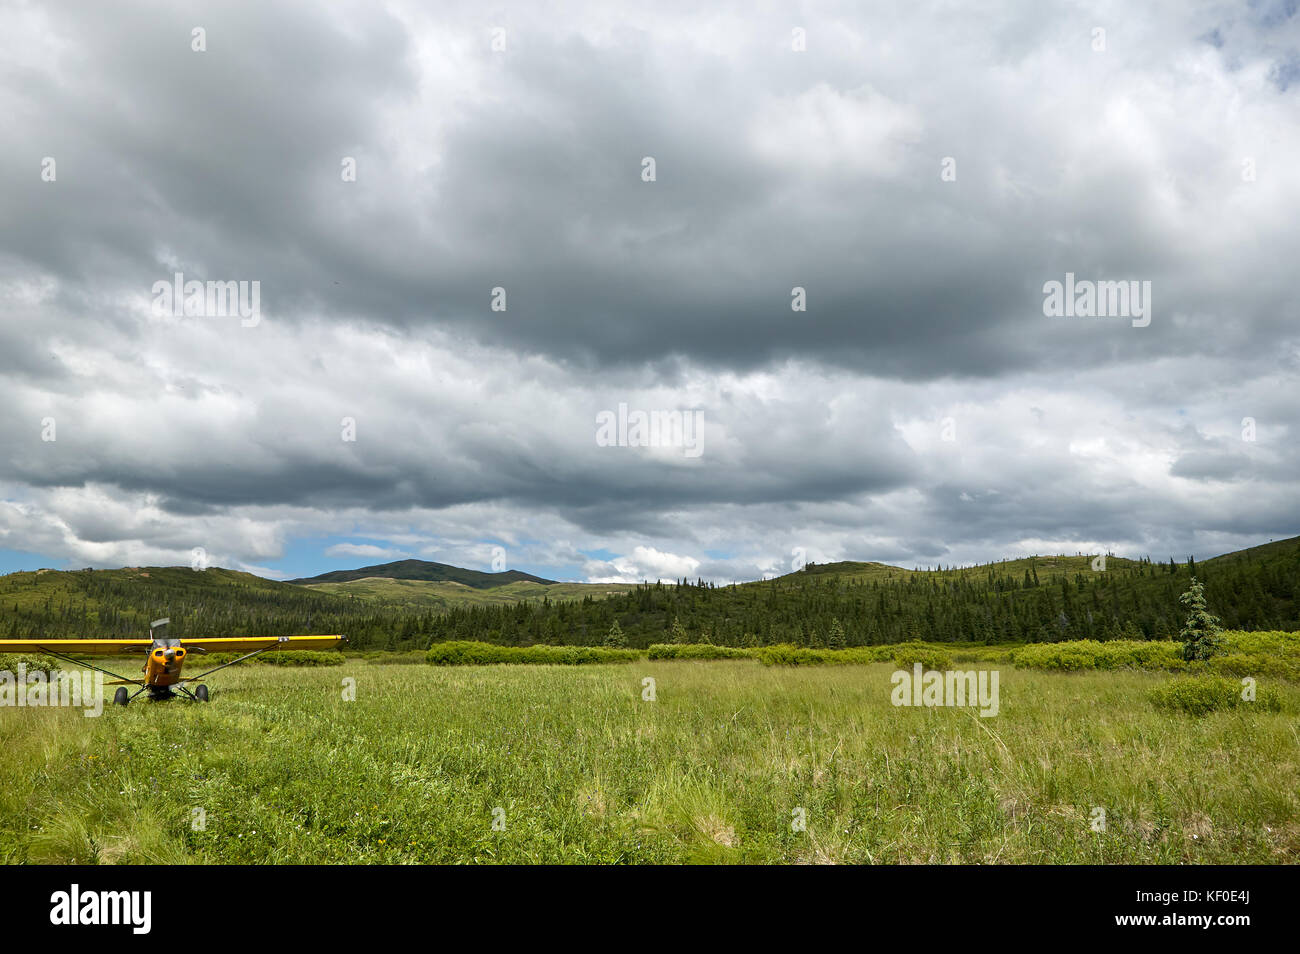 A small, yellow aircraft taking off on a grass, country runway in a scenic location under a cloudy sky. Stock Photo